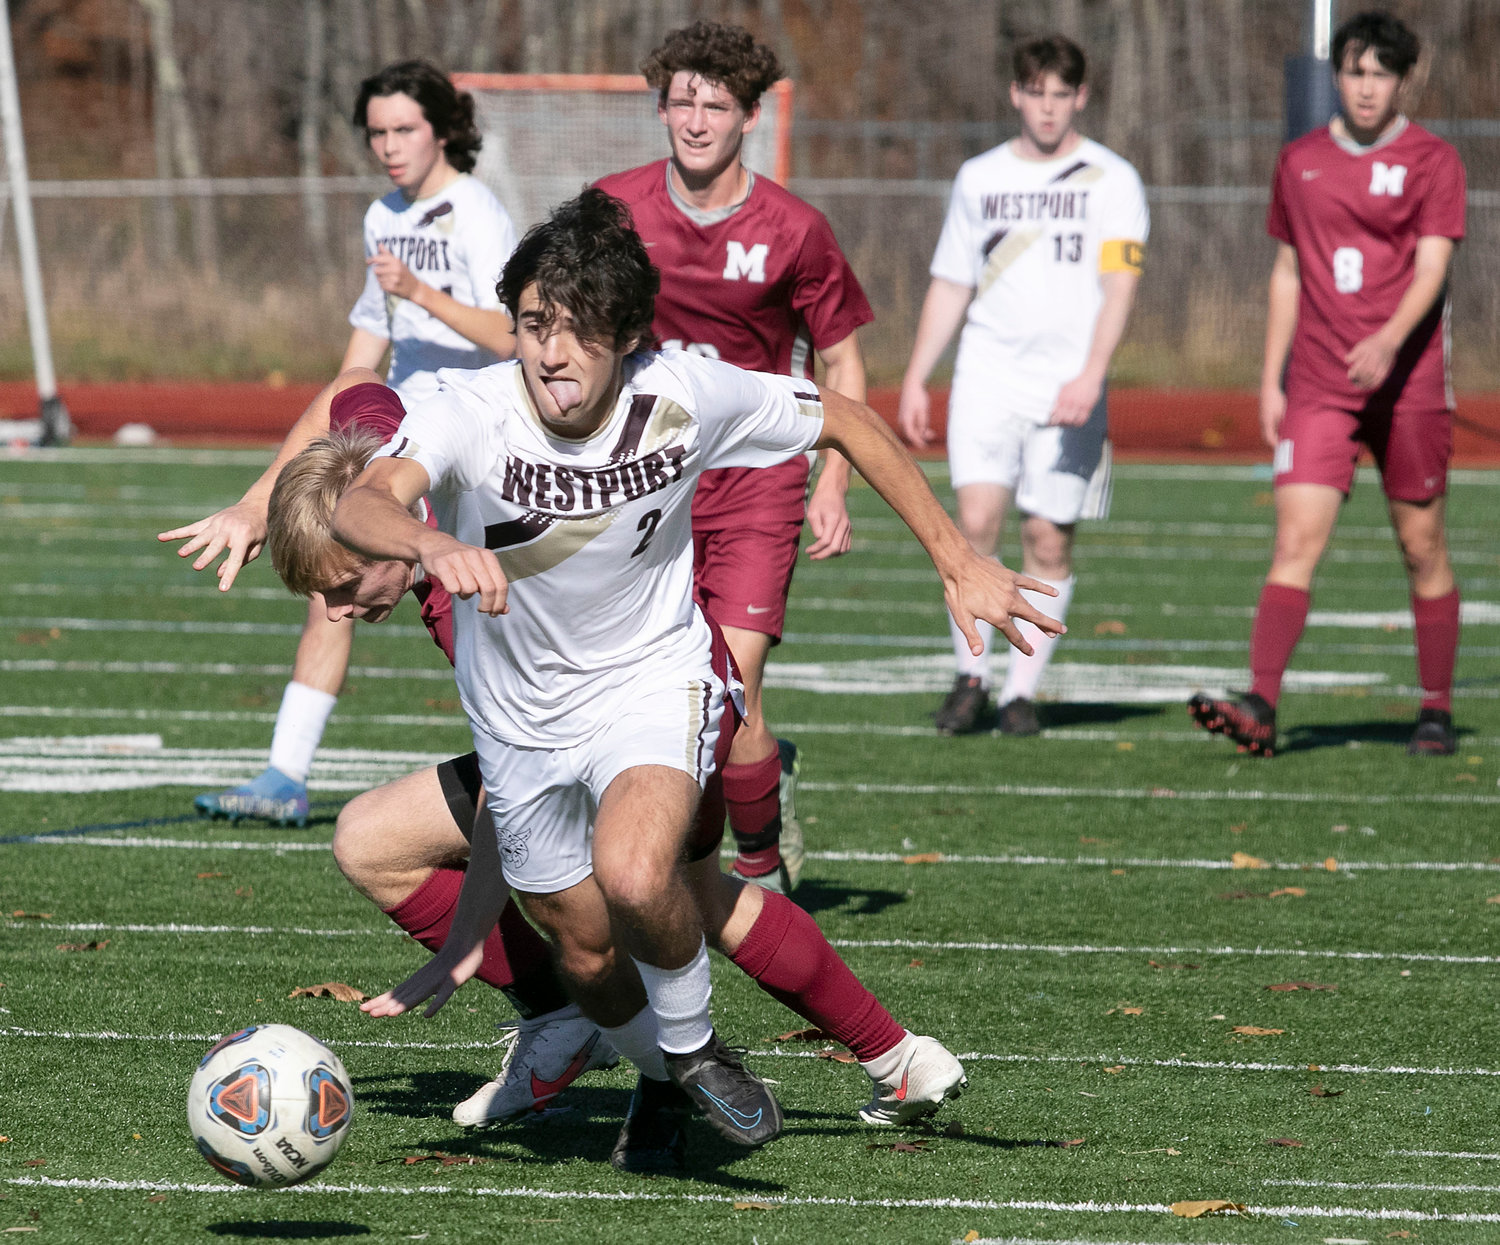 Hunter Brodeur beats a Millis defender and heads upfield with the ball.